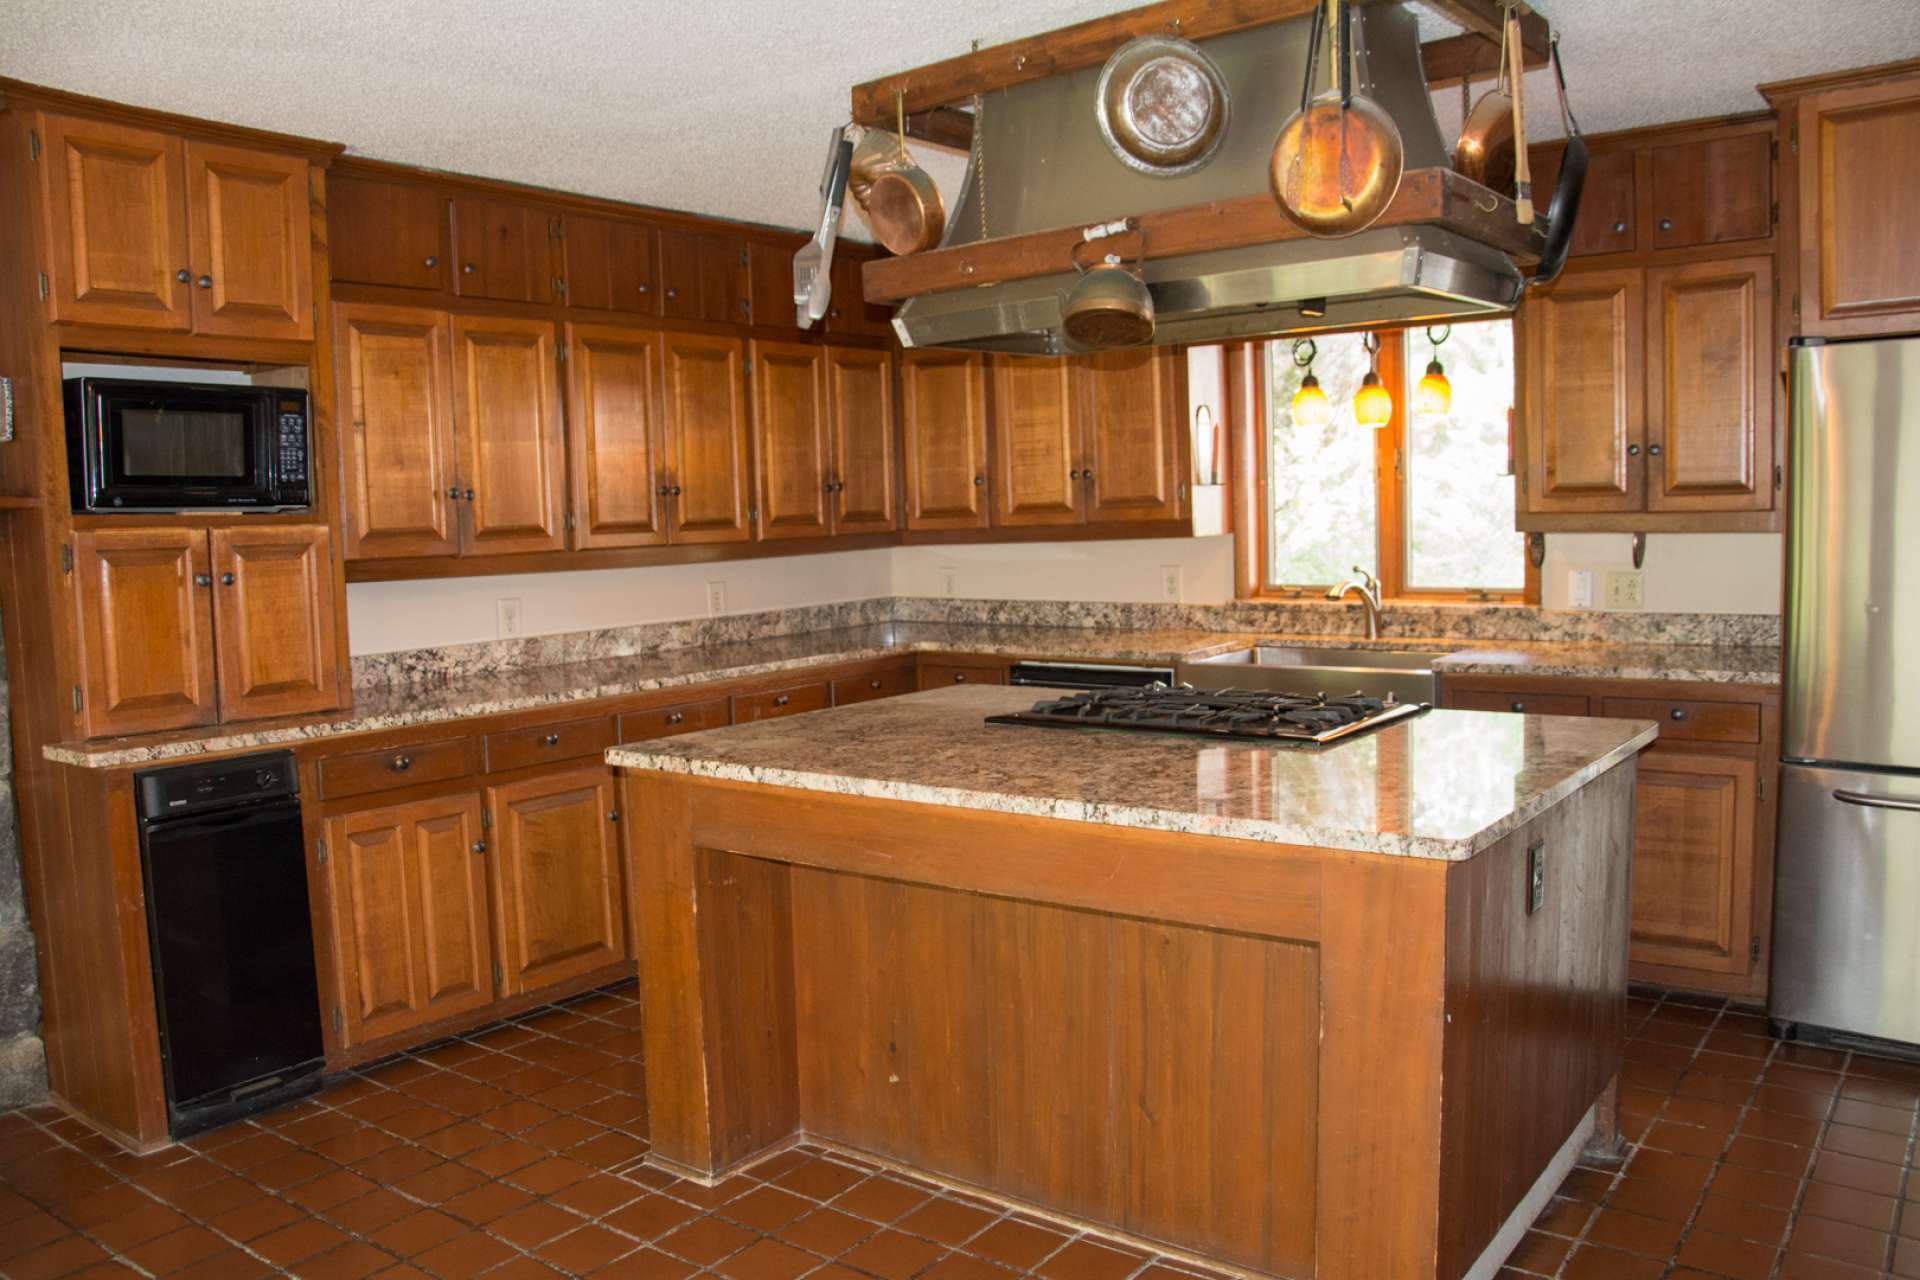 A spacious kitchen with granite counter tops, apron sink, large center island, gas range, and tiled floor offers plenty of room for help when preparing the meals.